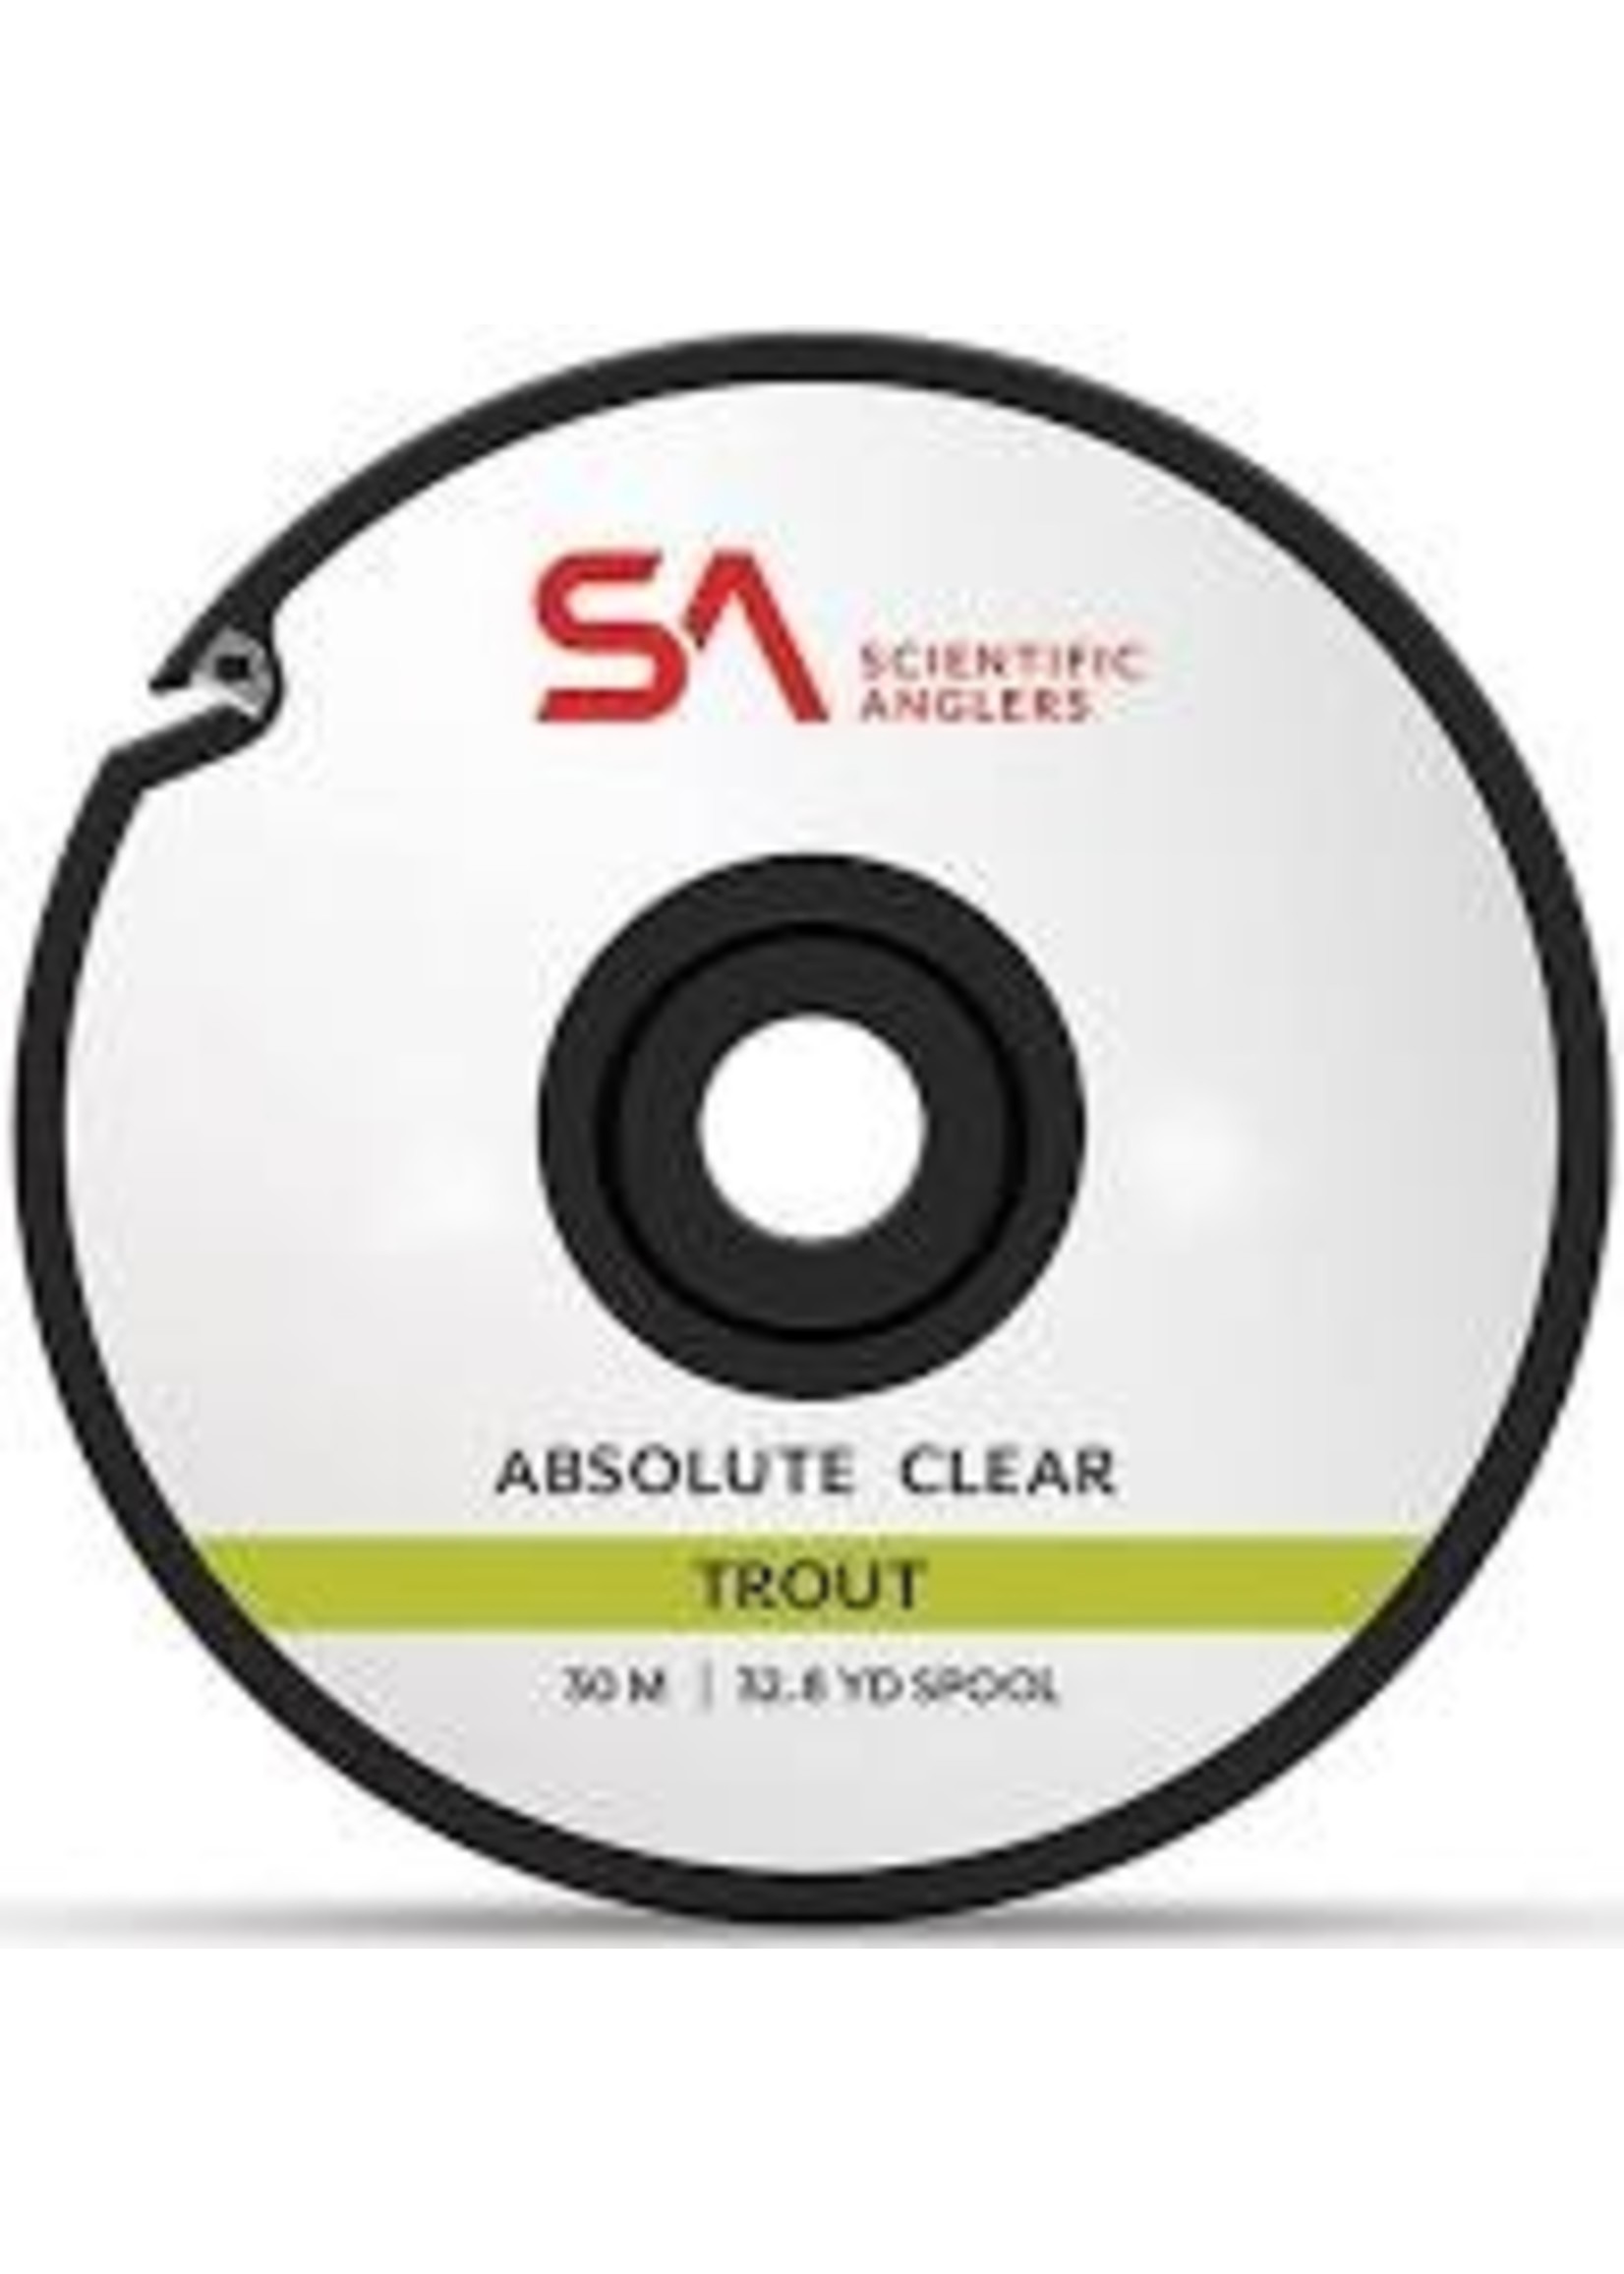 SCIENTIFIC ANGLERS ABSOLUTE TROUT CLEAR TIPPET